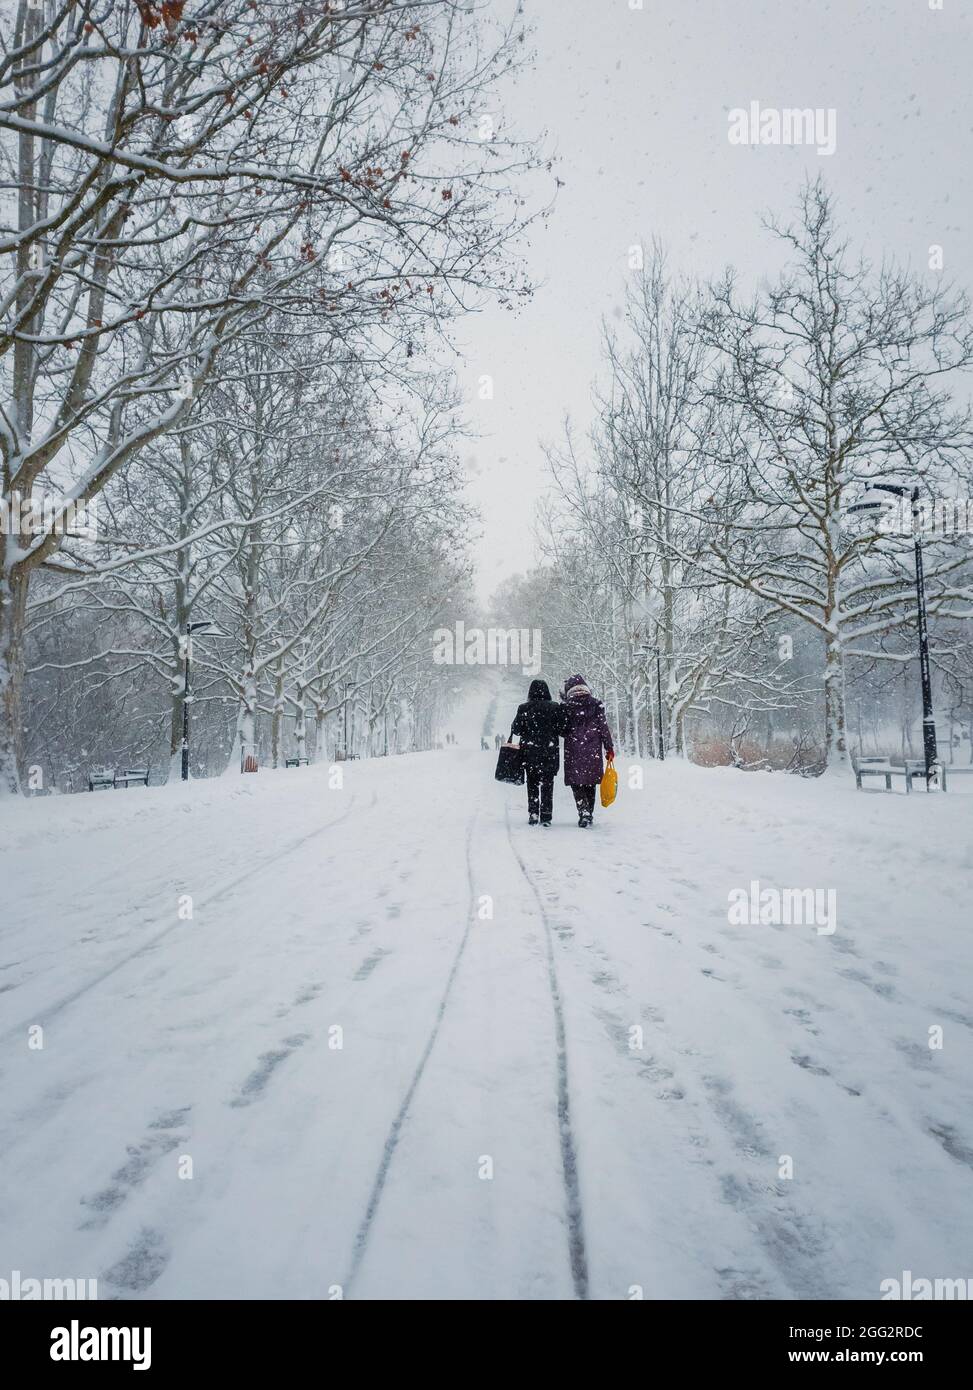 Two middle age women carrying pouches walks through the snowfall alongside the alley in the winter park. Wonderful snowing scene on the street. Cold s Stock Photo